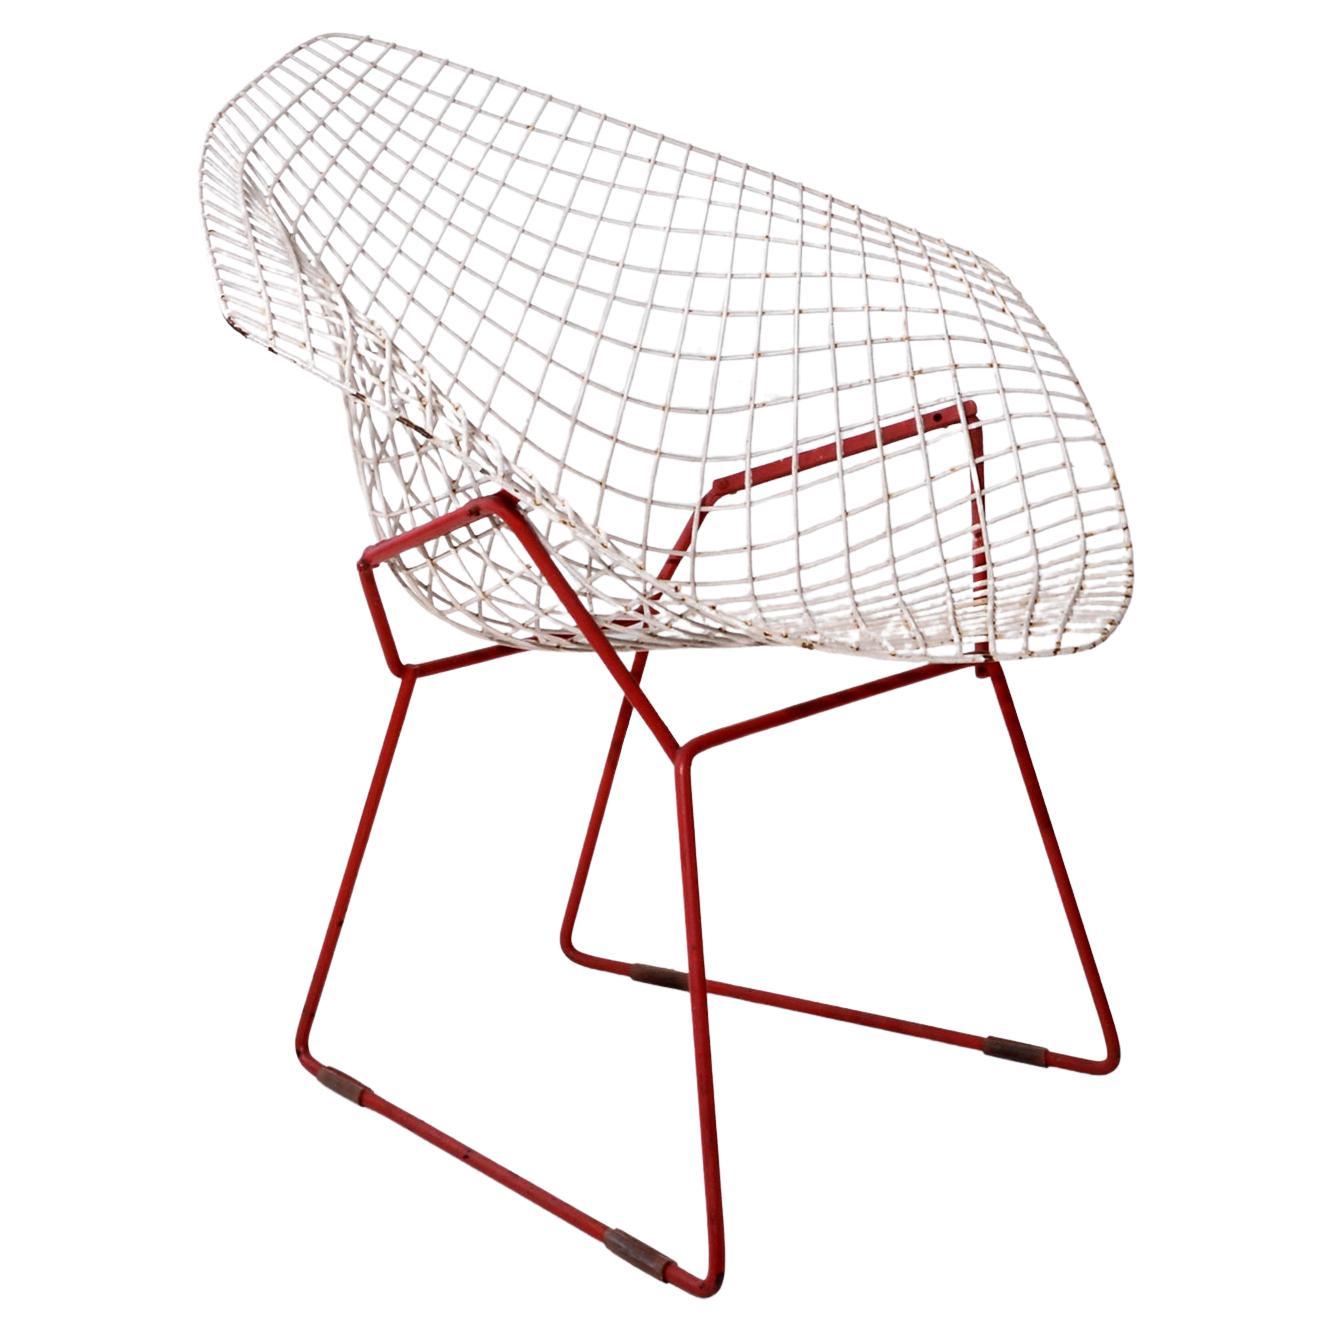 Early Diamond Chair by Harry Bertoia, White and Dark Red Enameled Metal, c. 1956 For Sale